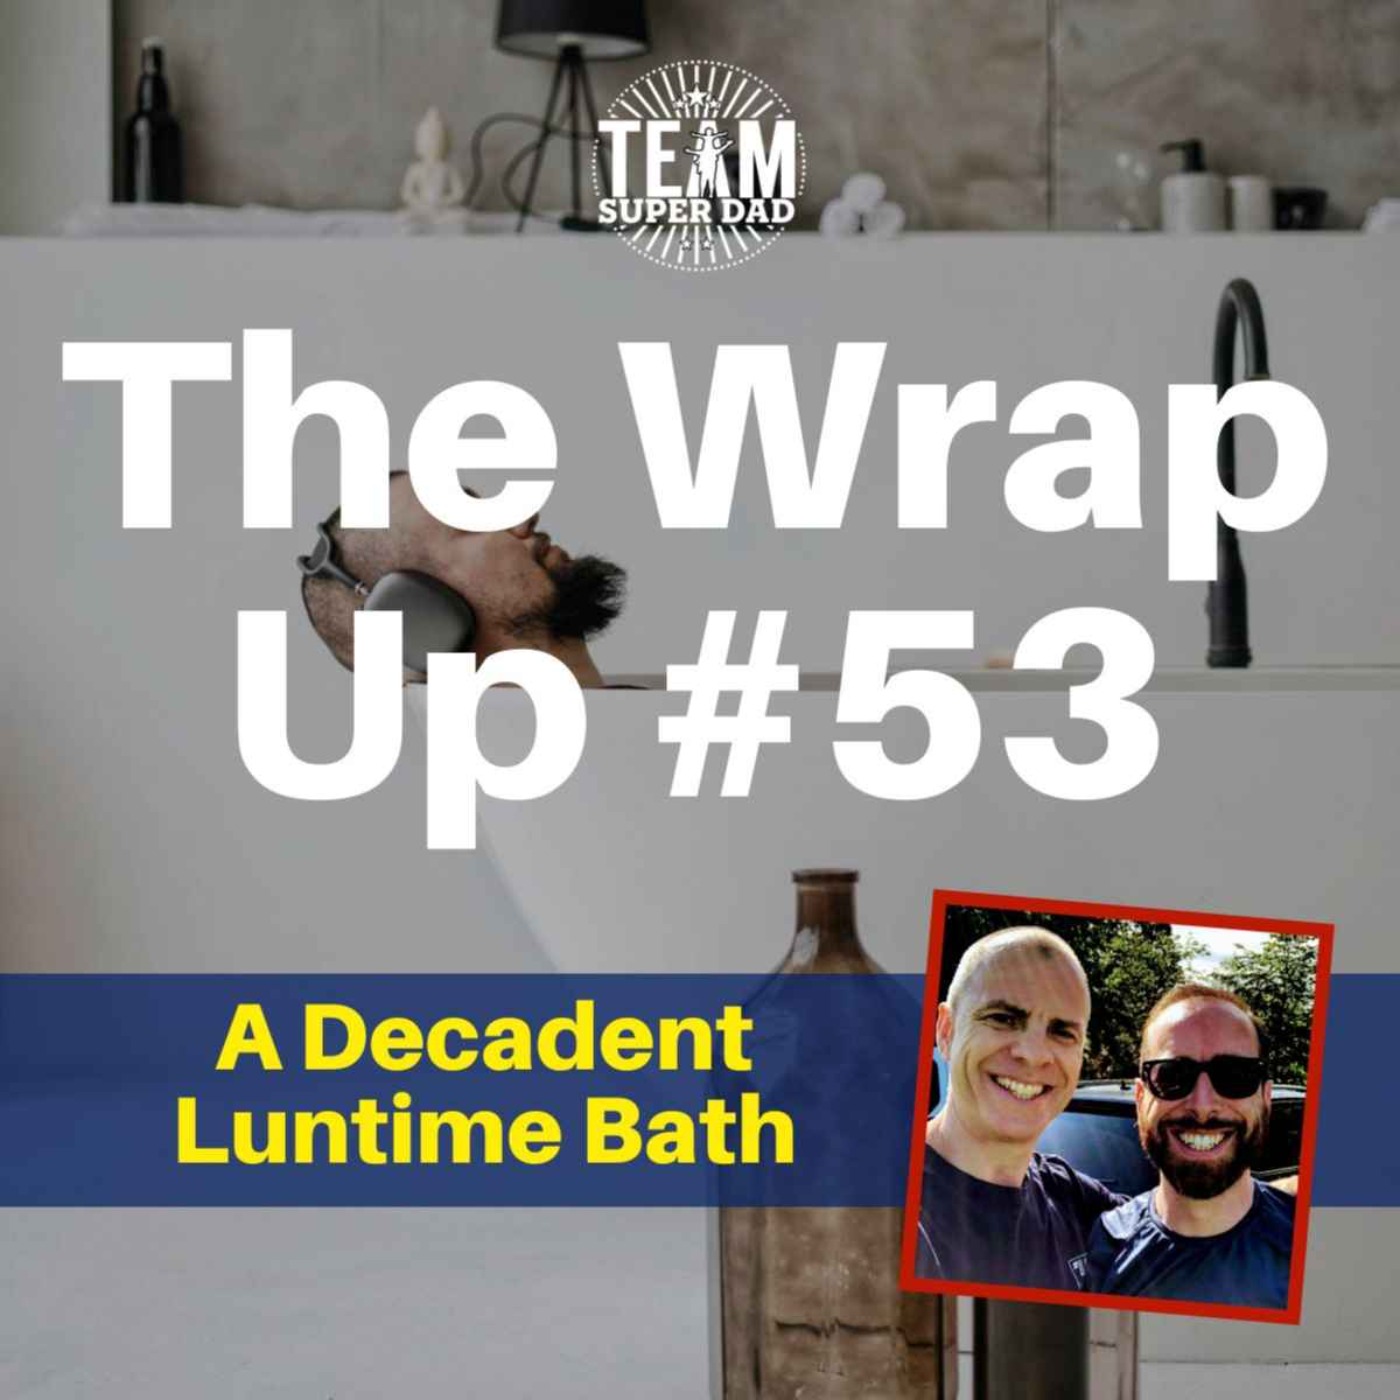 A Decadent Lunch Time Bath - it's the Wrap Up #53